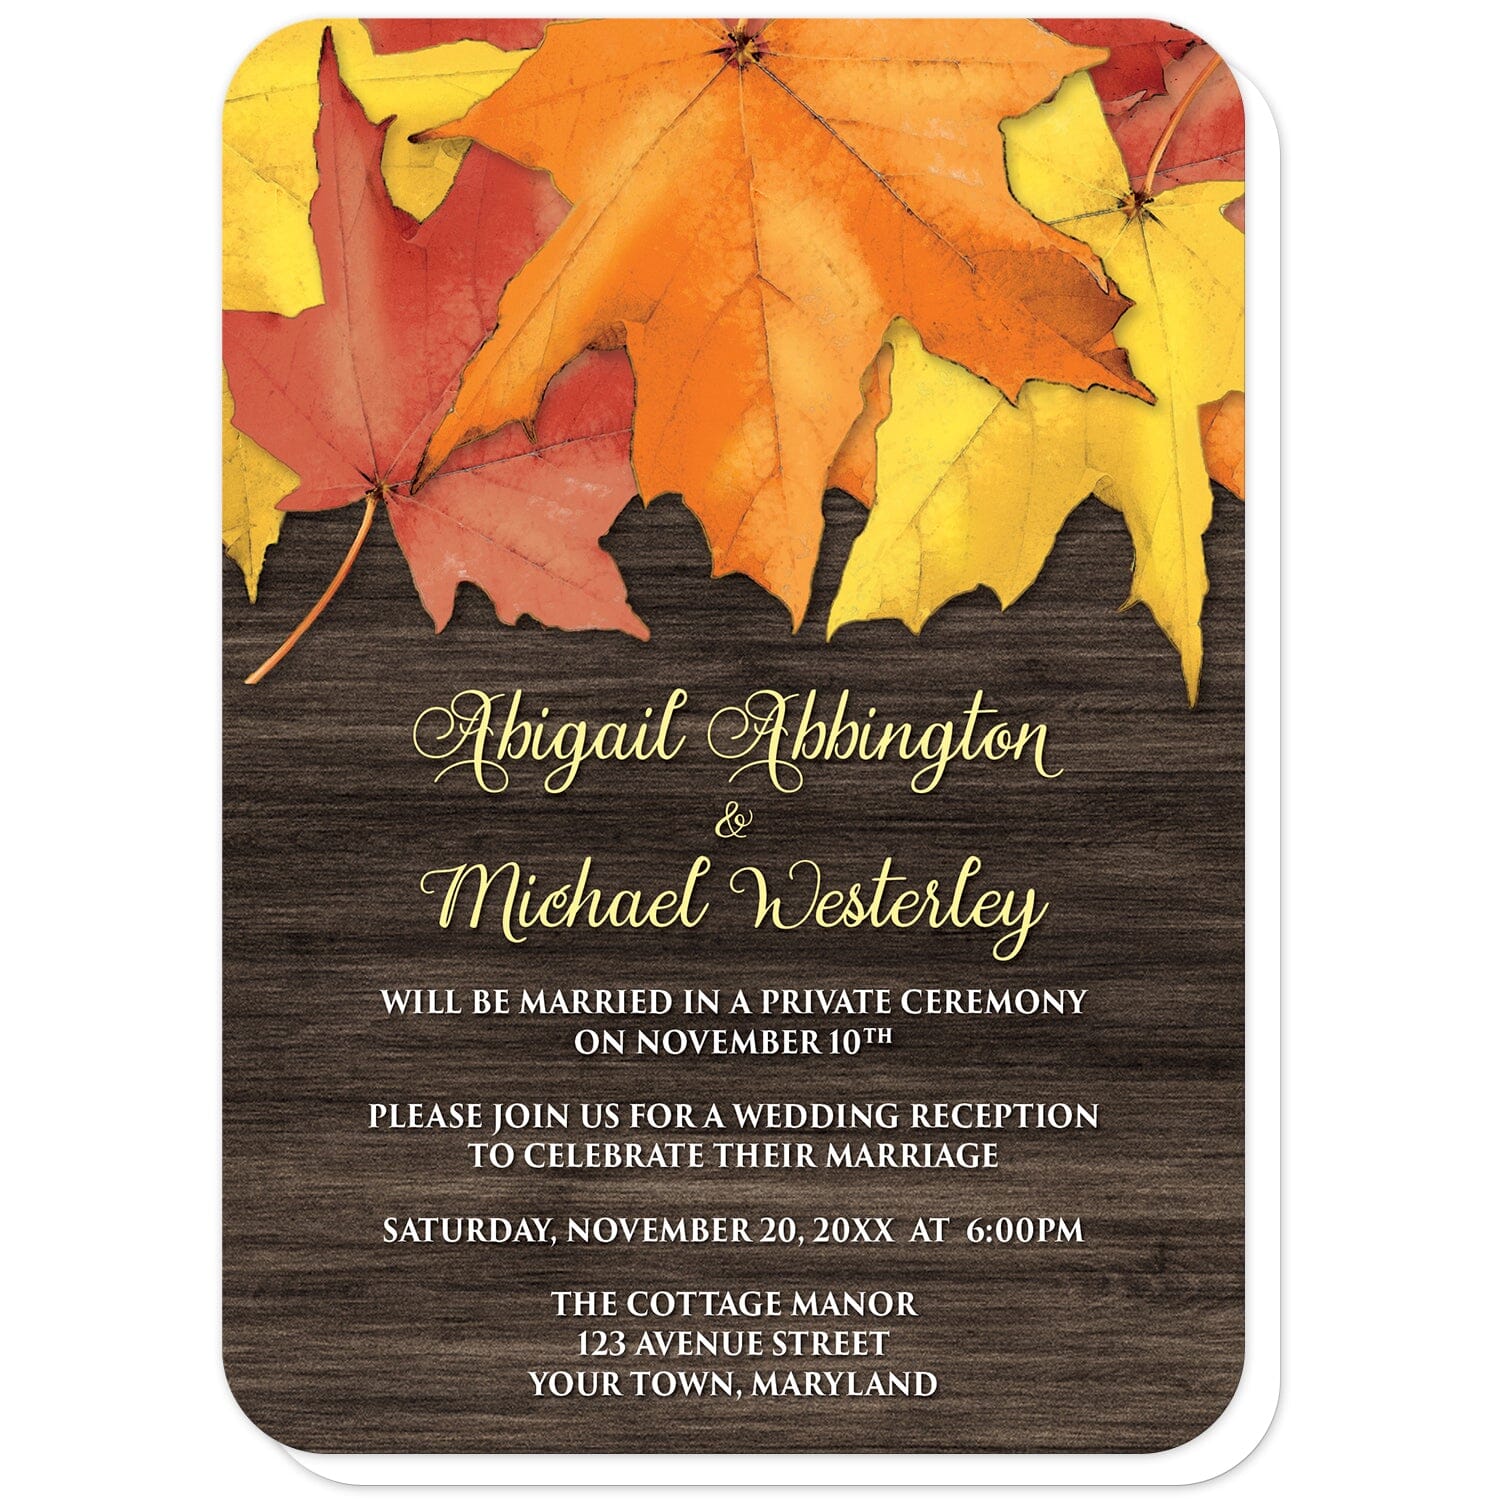 Rustic Autumn Leaves Wood Reception Only Invitations (with rounded corners) at Artistically Invited. Southern-inspired rustic autumn leaves wood reception only invitations with an arrangement of rustic yellow, orange, and red fall leaves along the top over a dark brown wood pattern. Your personalized post-wedding reception celebration details are custom printed in yellow and white over the rustic wood background. 